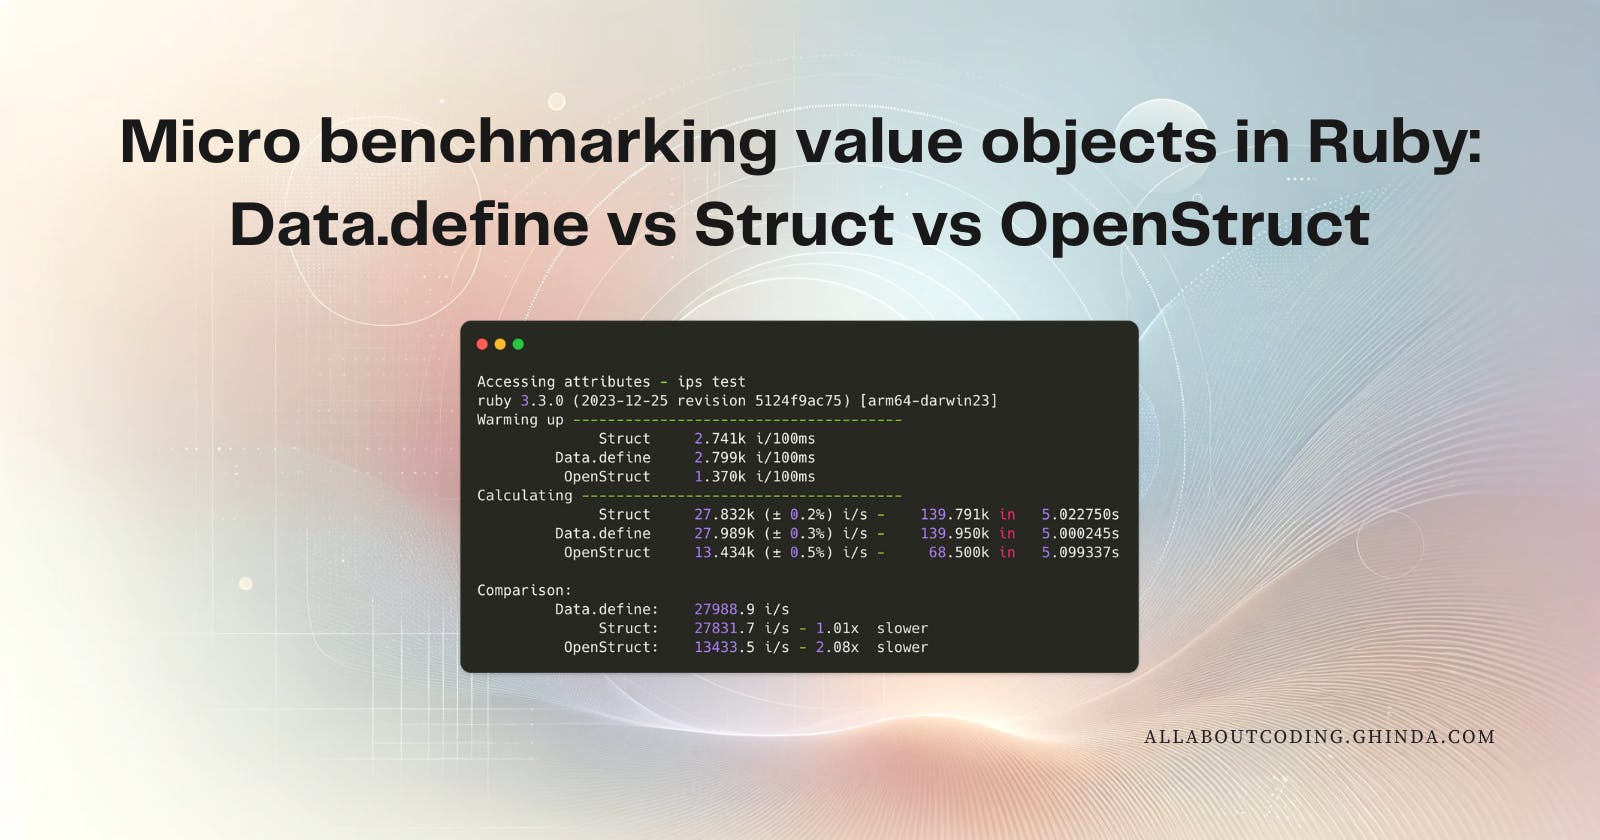 Micro benchmarking value objects in Ruby: Data.define vs Struct vs OpenStruct